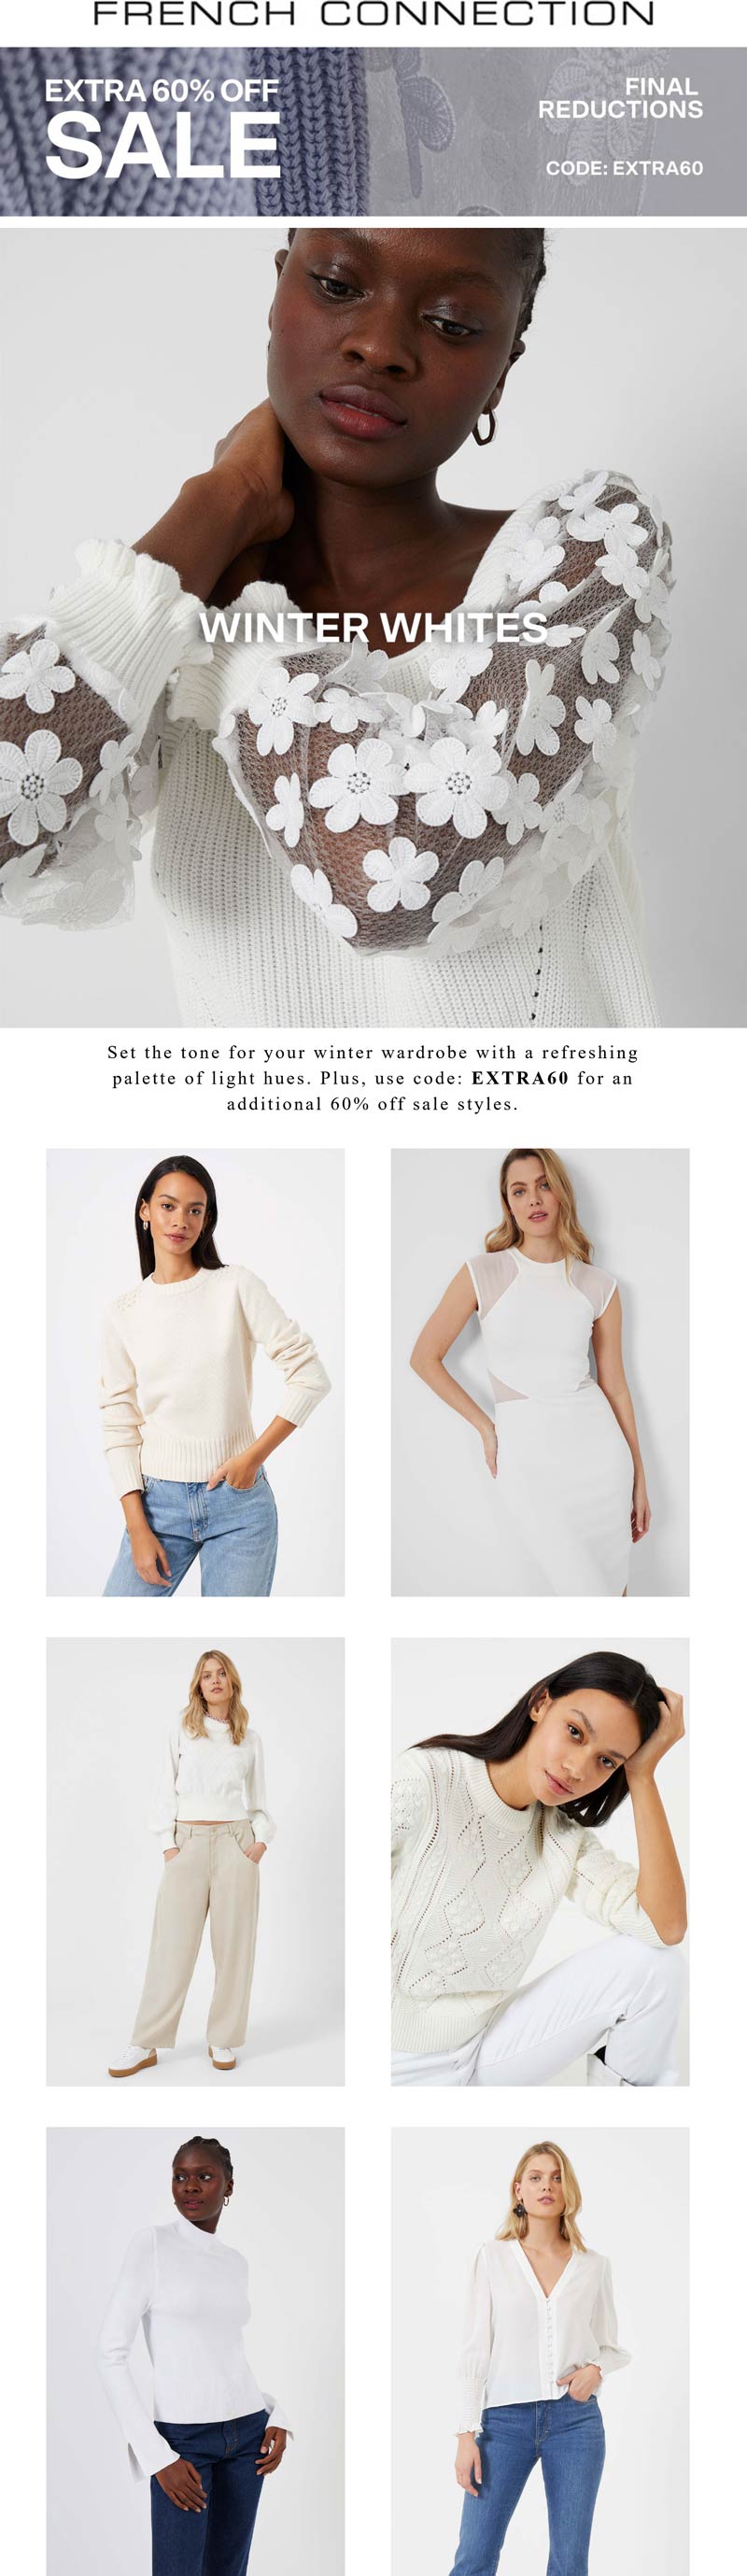 French Connection stores Coupon  Extra 60% off sale styles at French Connection via promo code EXTRA60 #frenchconnection 